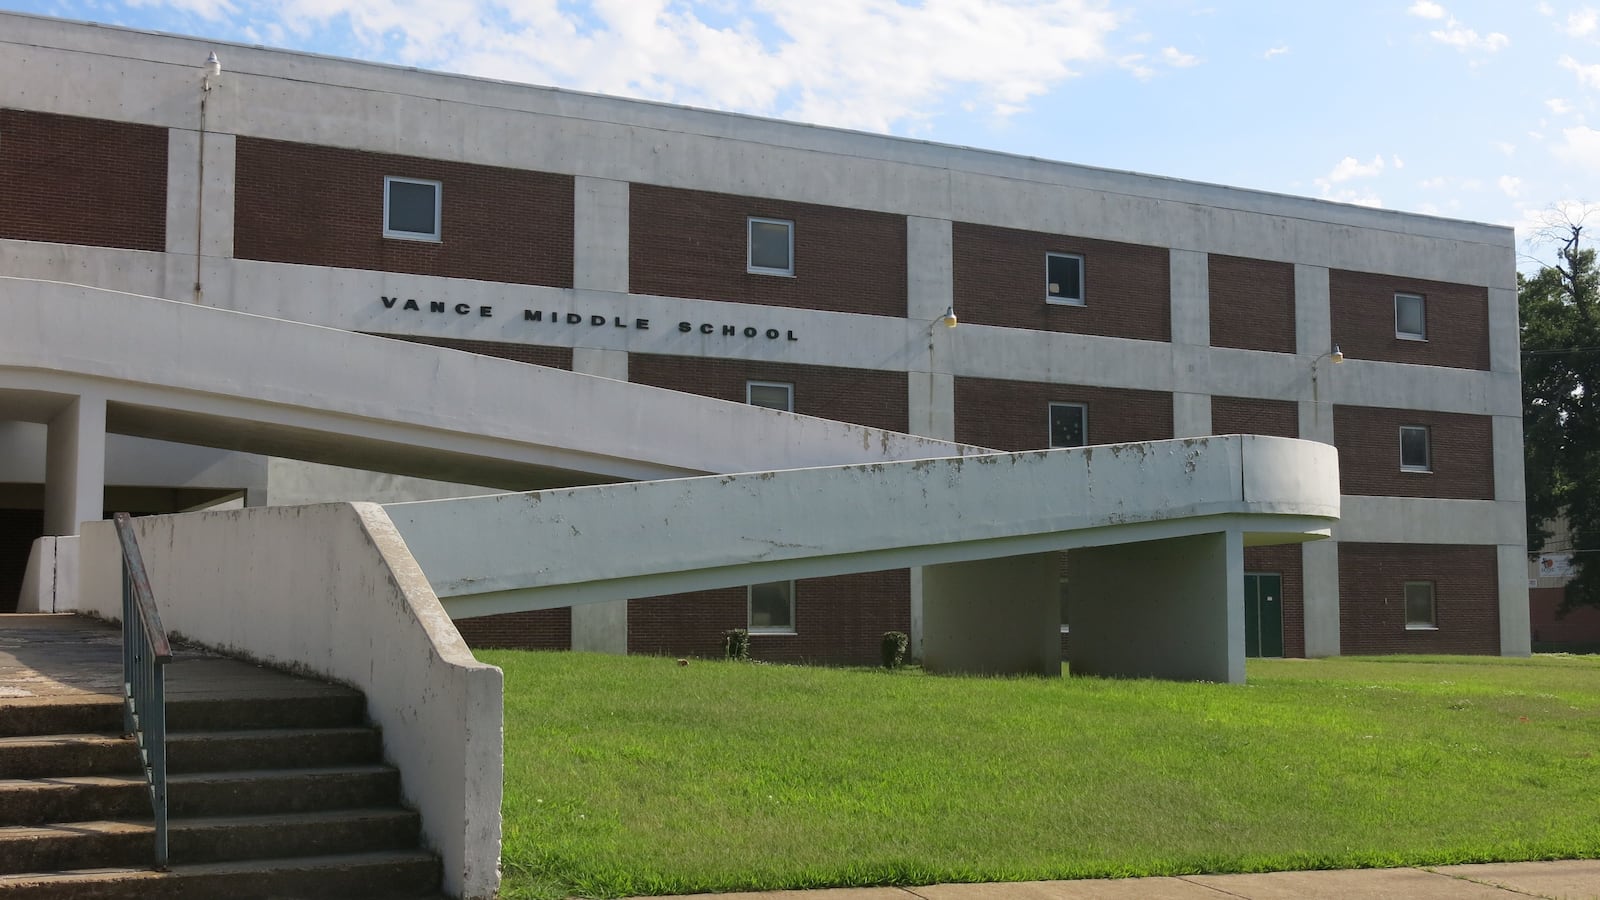 Vance Middle School, one of the schools slated to close next year, could host the district's virtual school, regional central office staff, or a charter school.